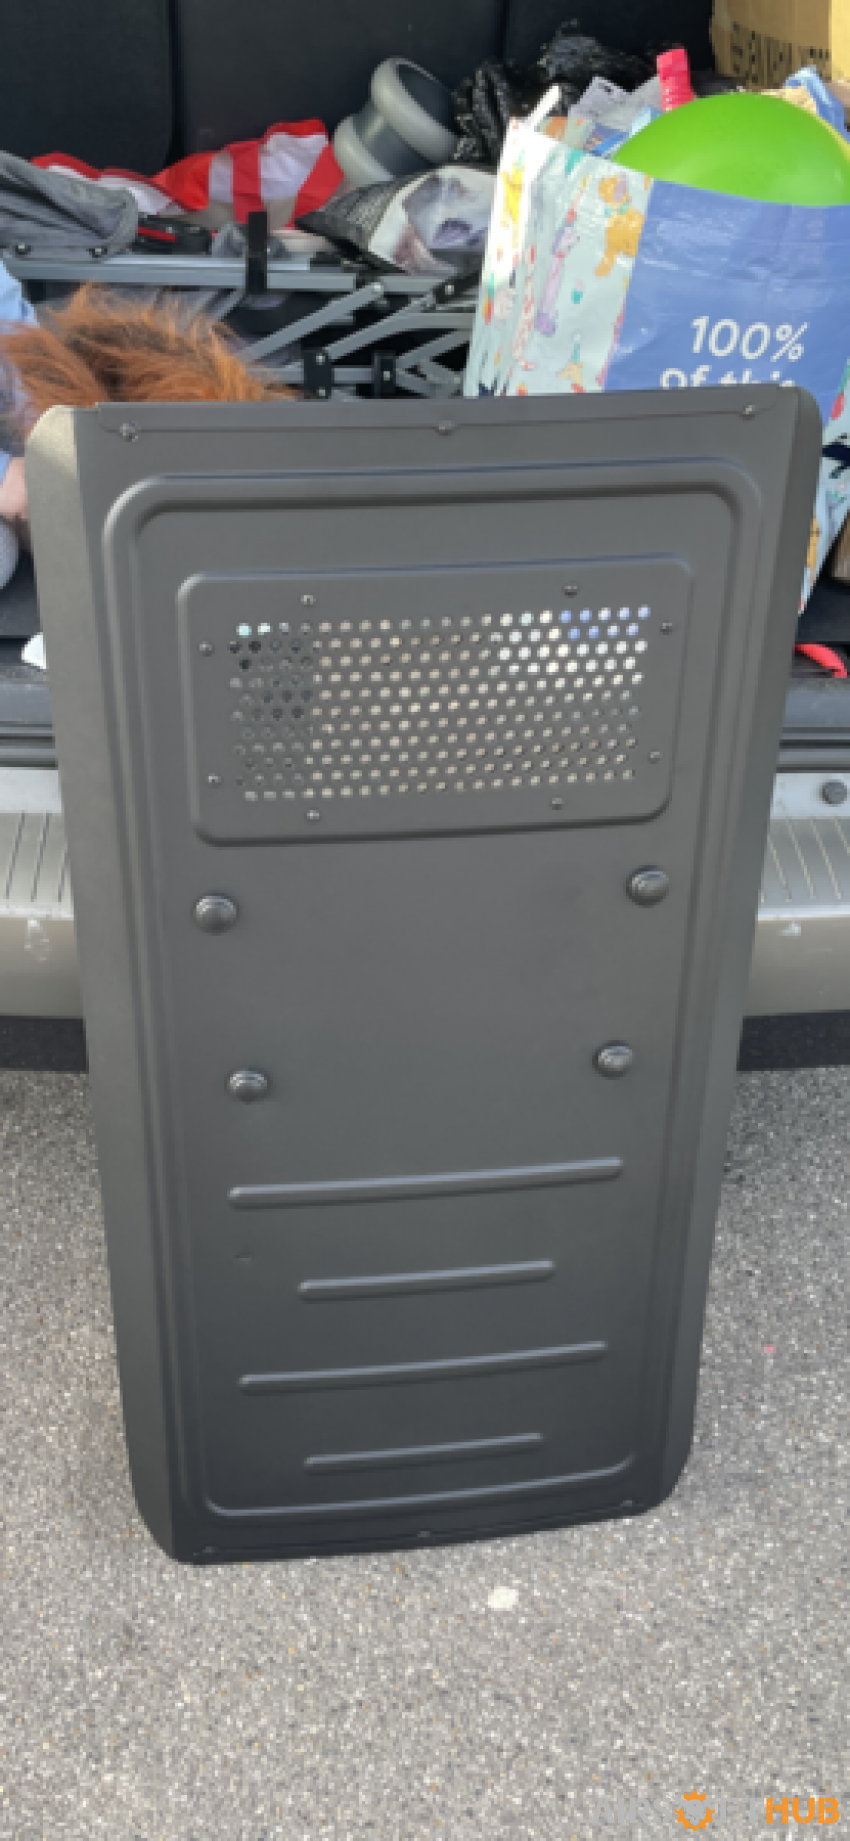 Metal Riot Shield - Used airsoft equipment